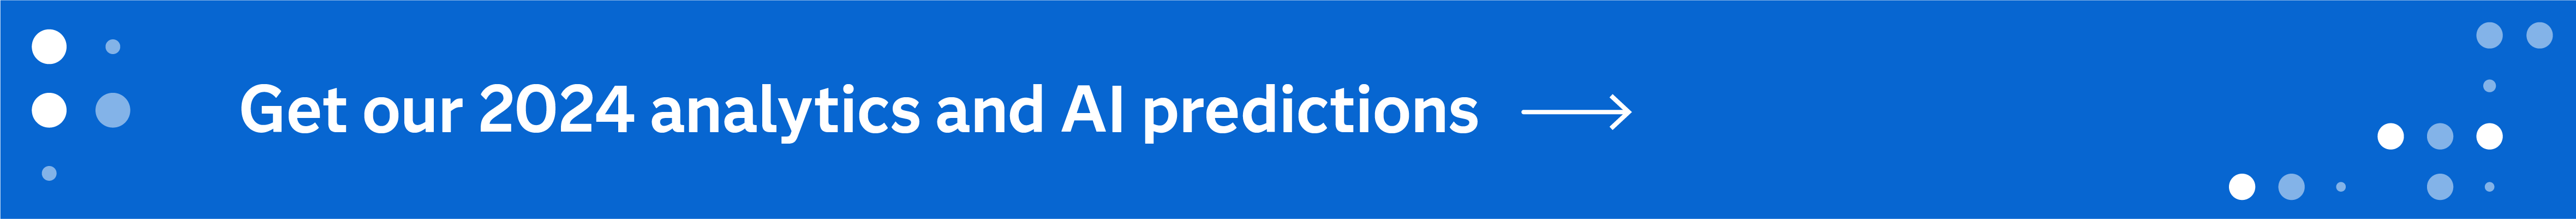 banner promotion 2024 AI predictions